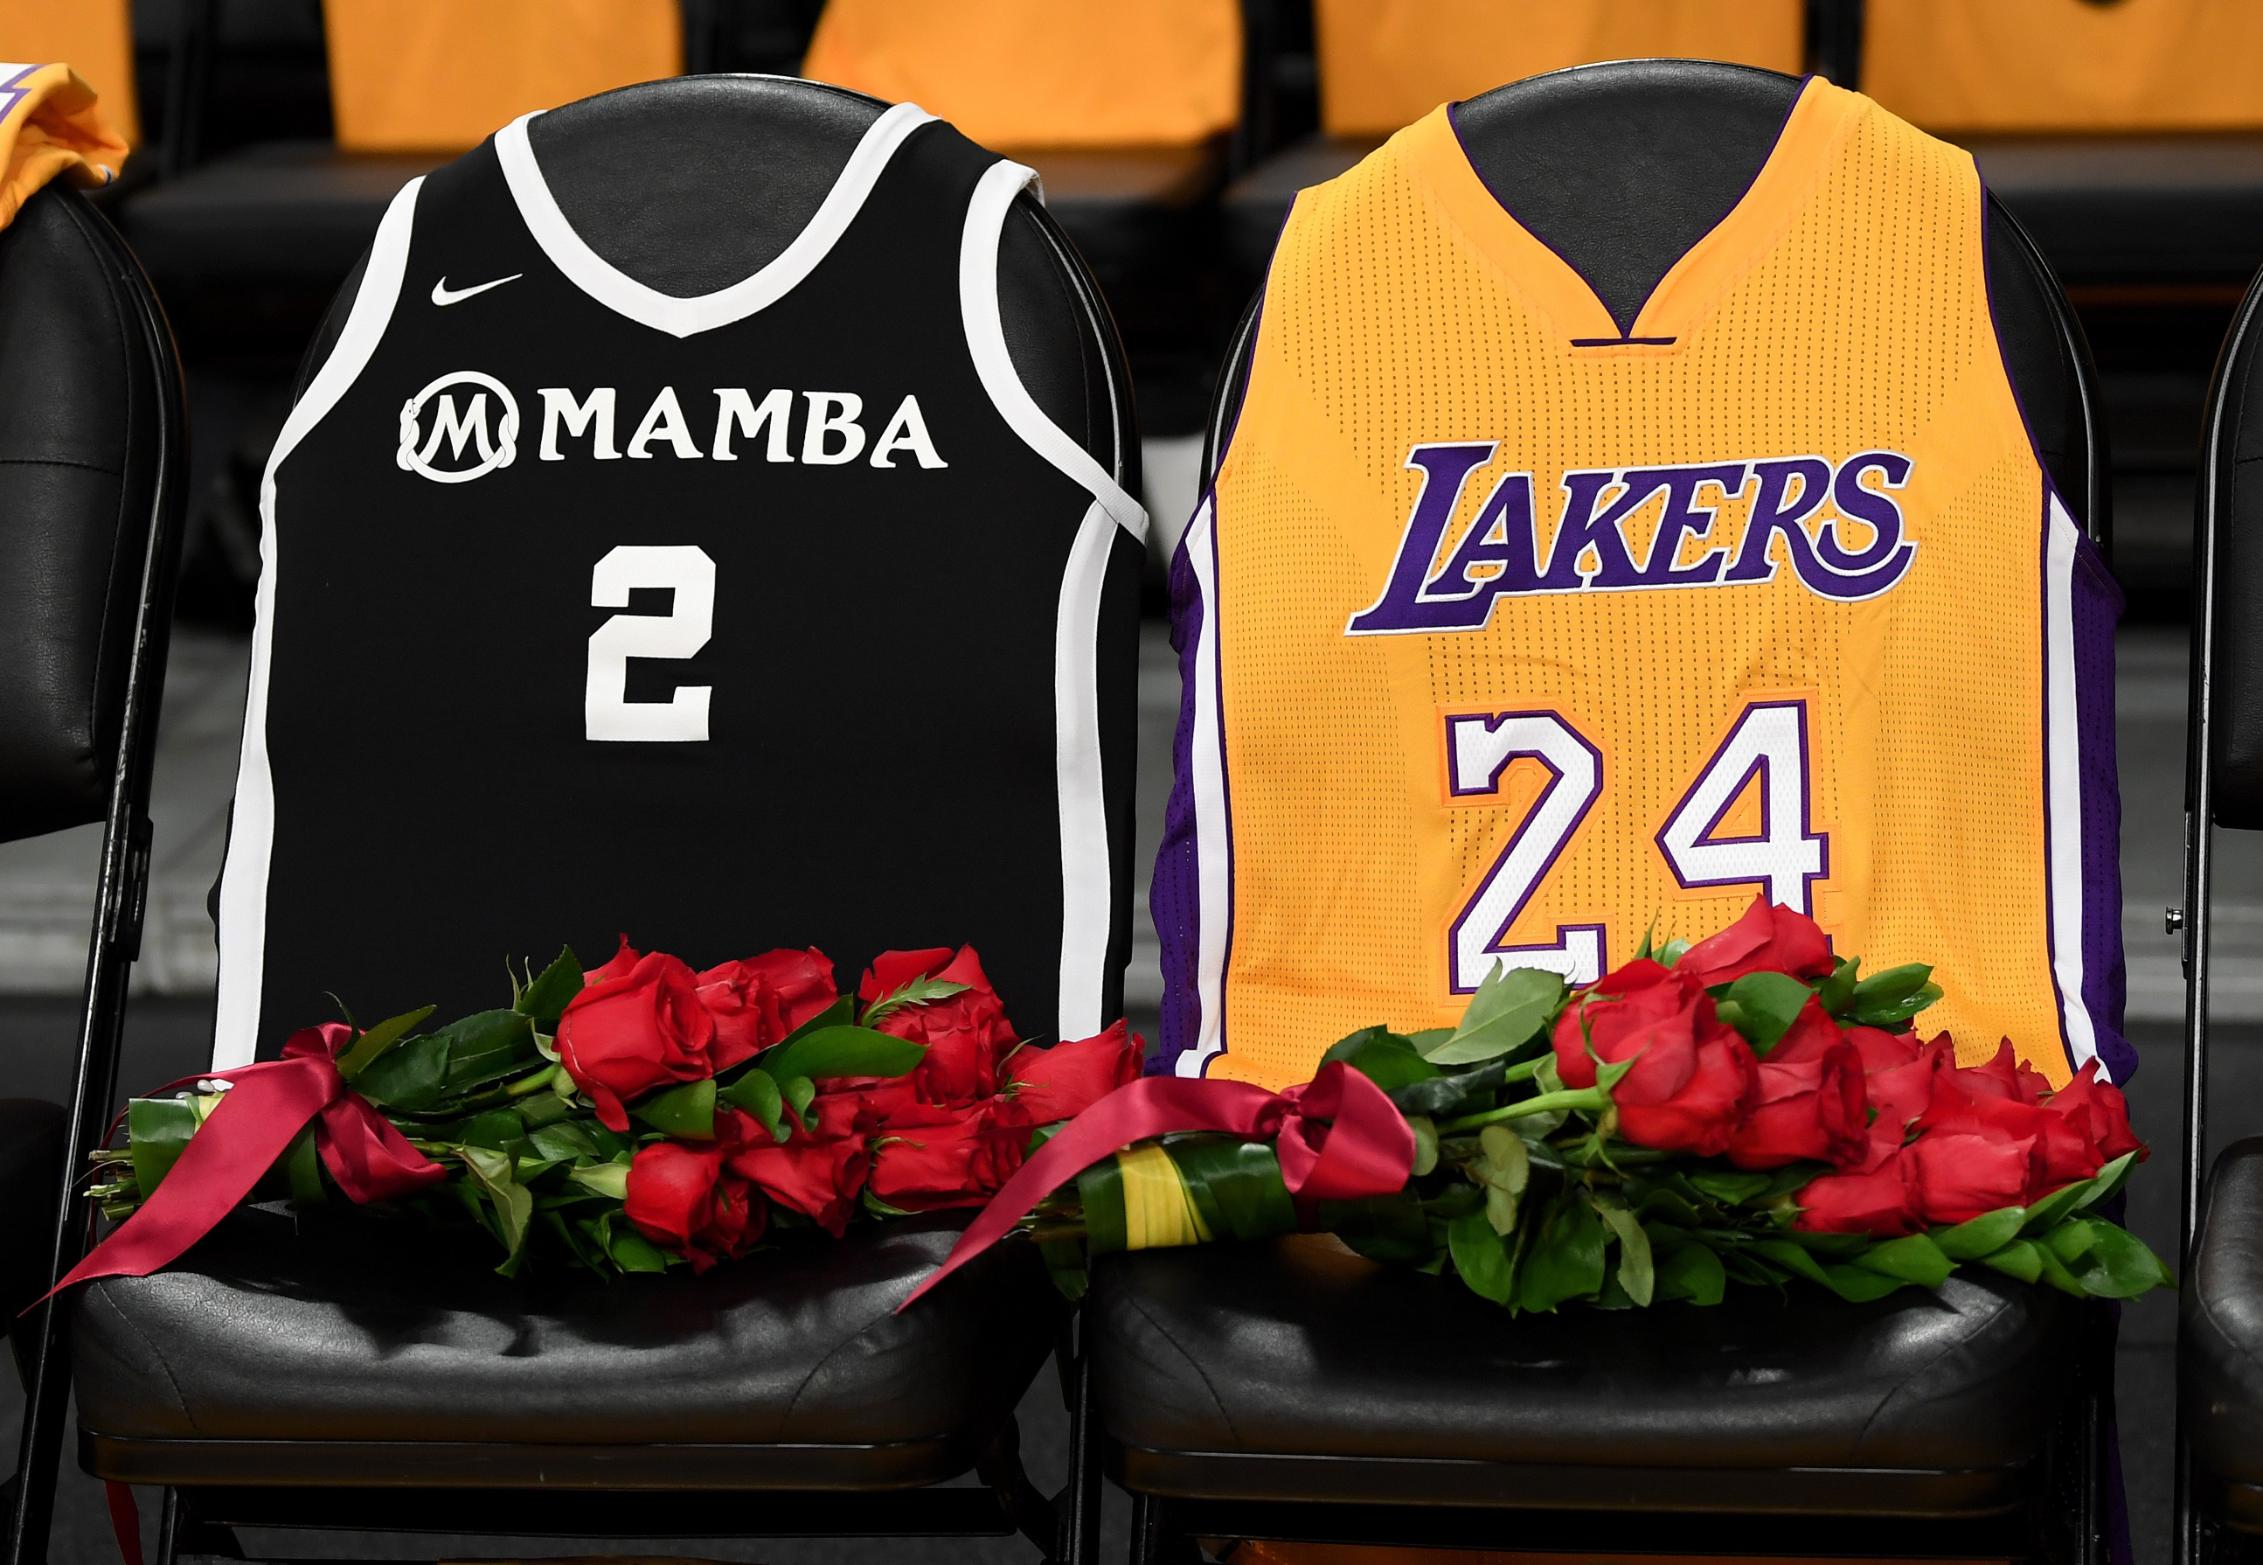 Lakers plan to retire both numbers, 8 and 24, that Kobe Bryant